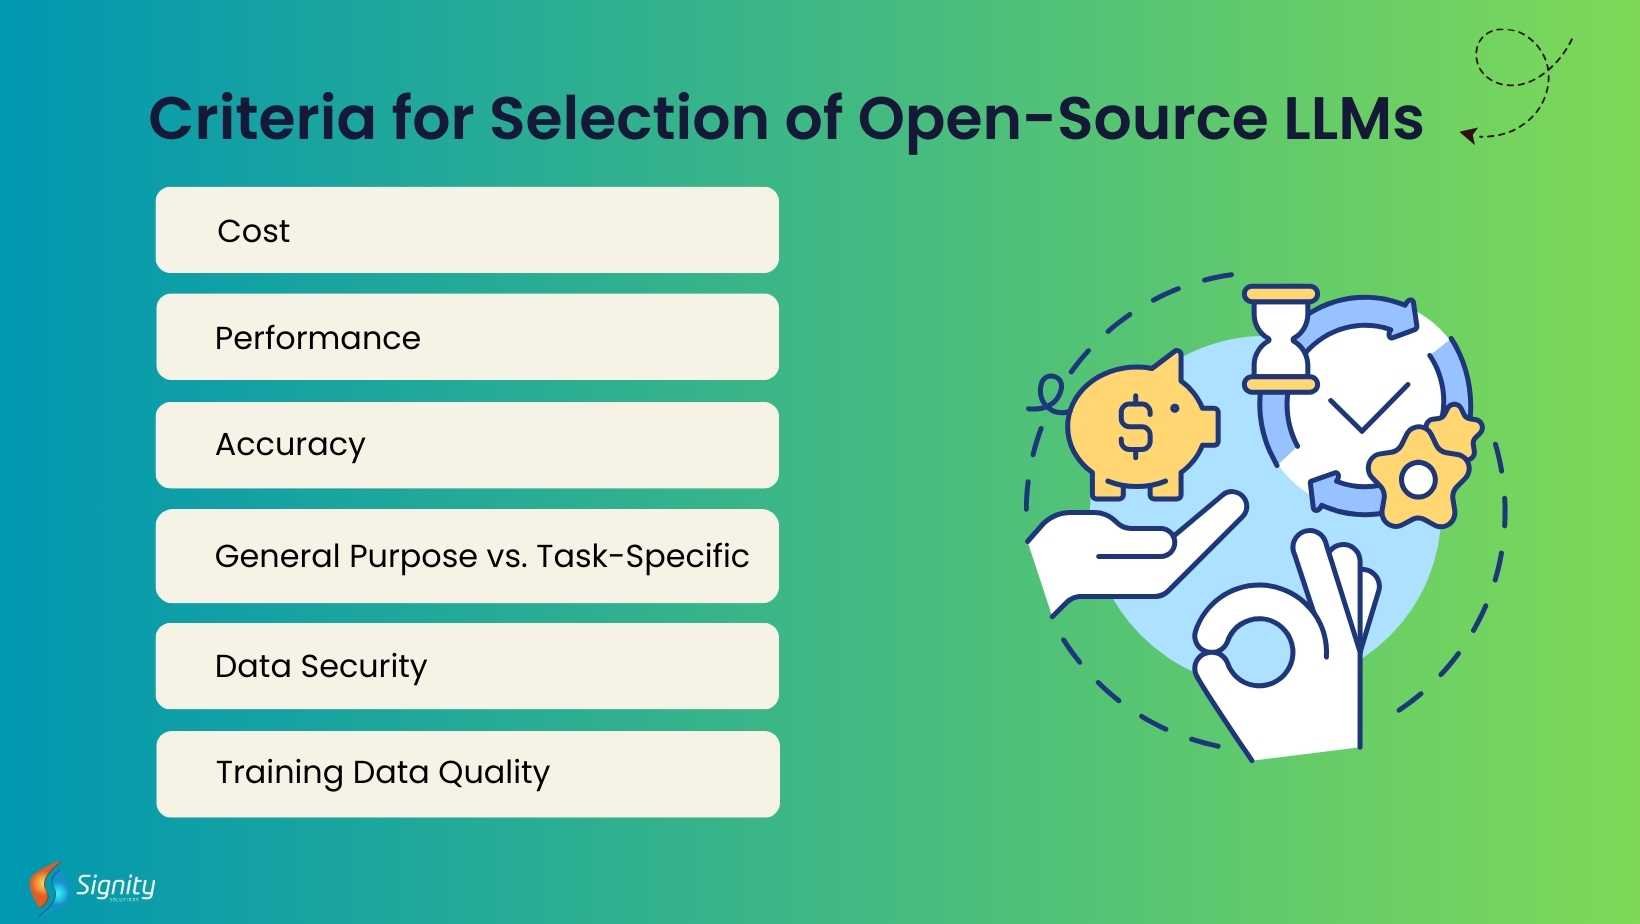 Criteria for Selection of Open-Source LLMs